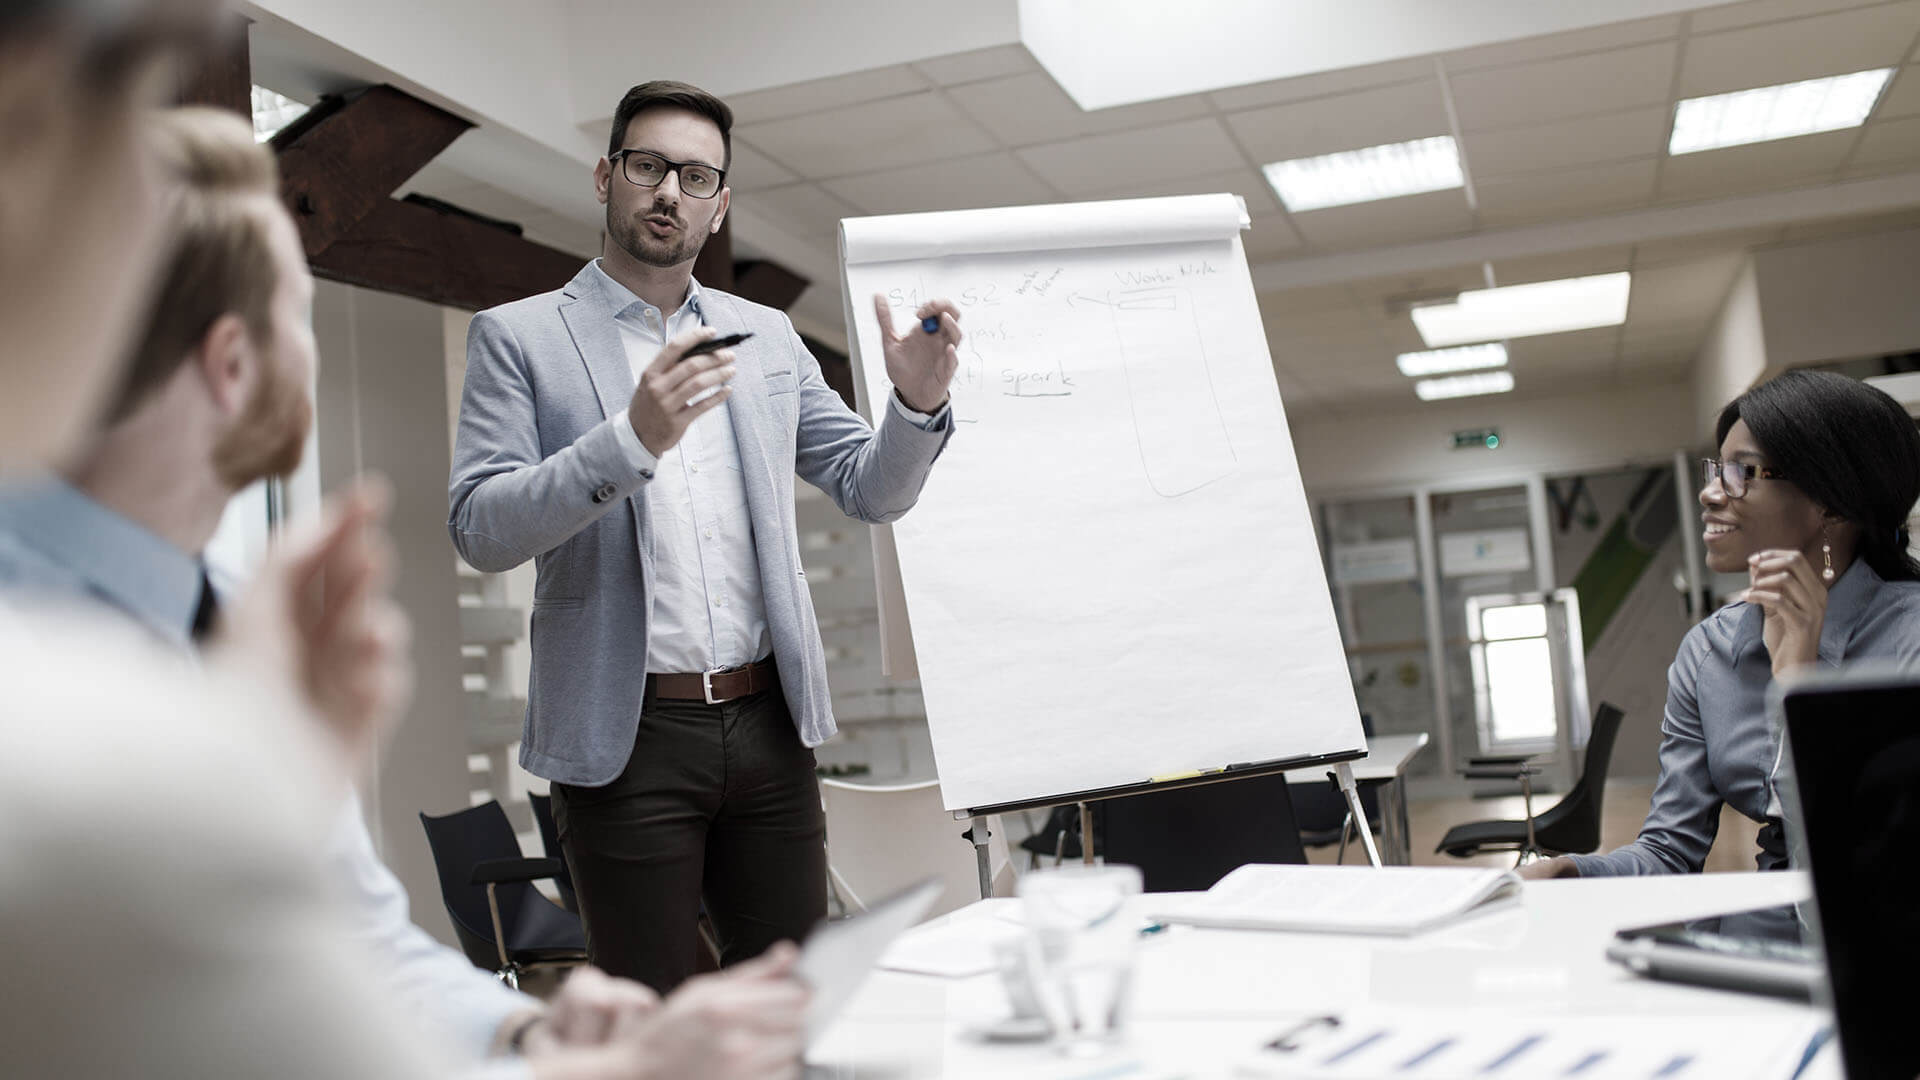 Improve Your Organization's Effectiveness One Meeting at a Time